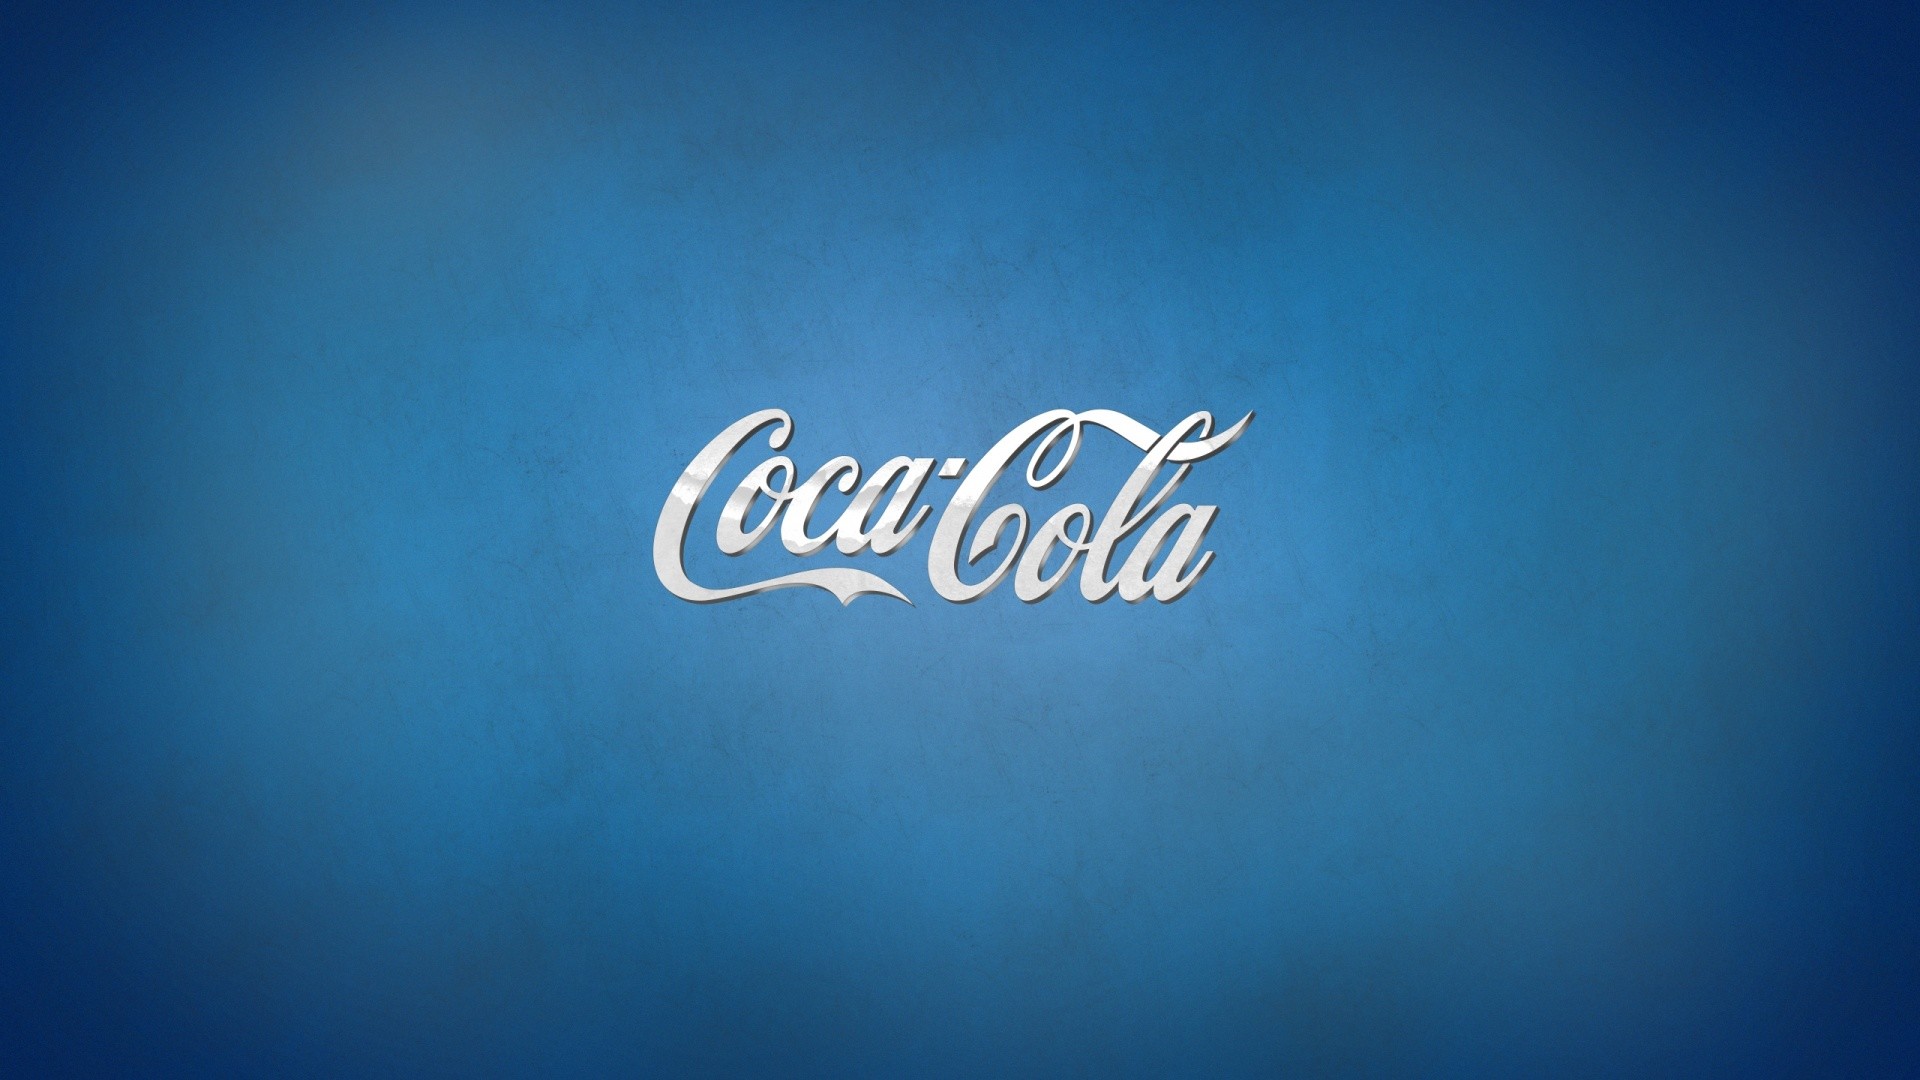 1920x1080  Coca Cola Blue. How to set wallpaper on your desktop? Click the  download link from above and set the wallpaper on the desktop from your OS.